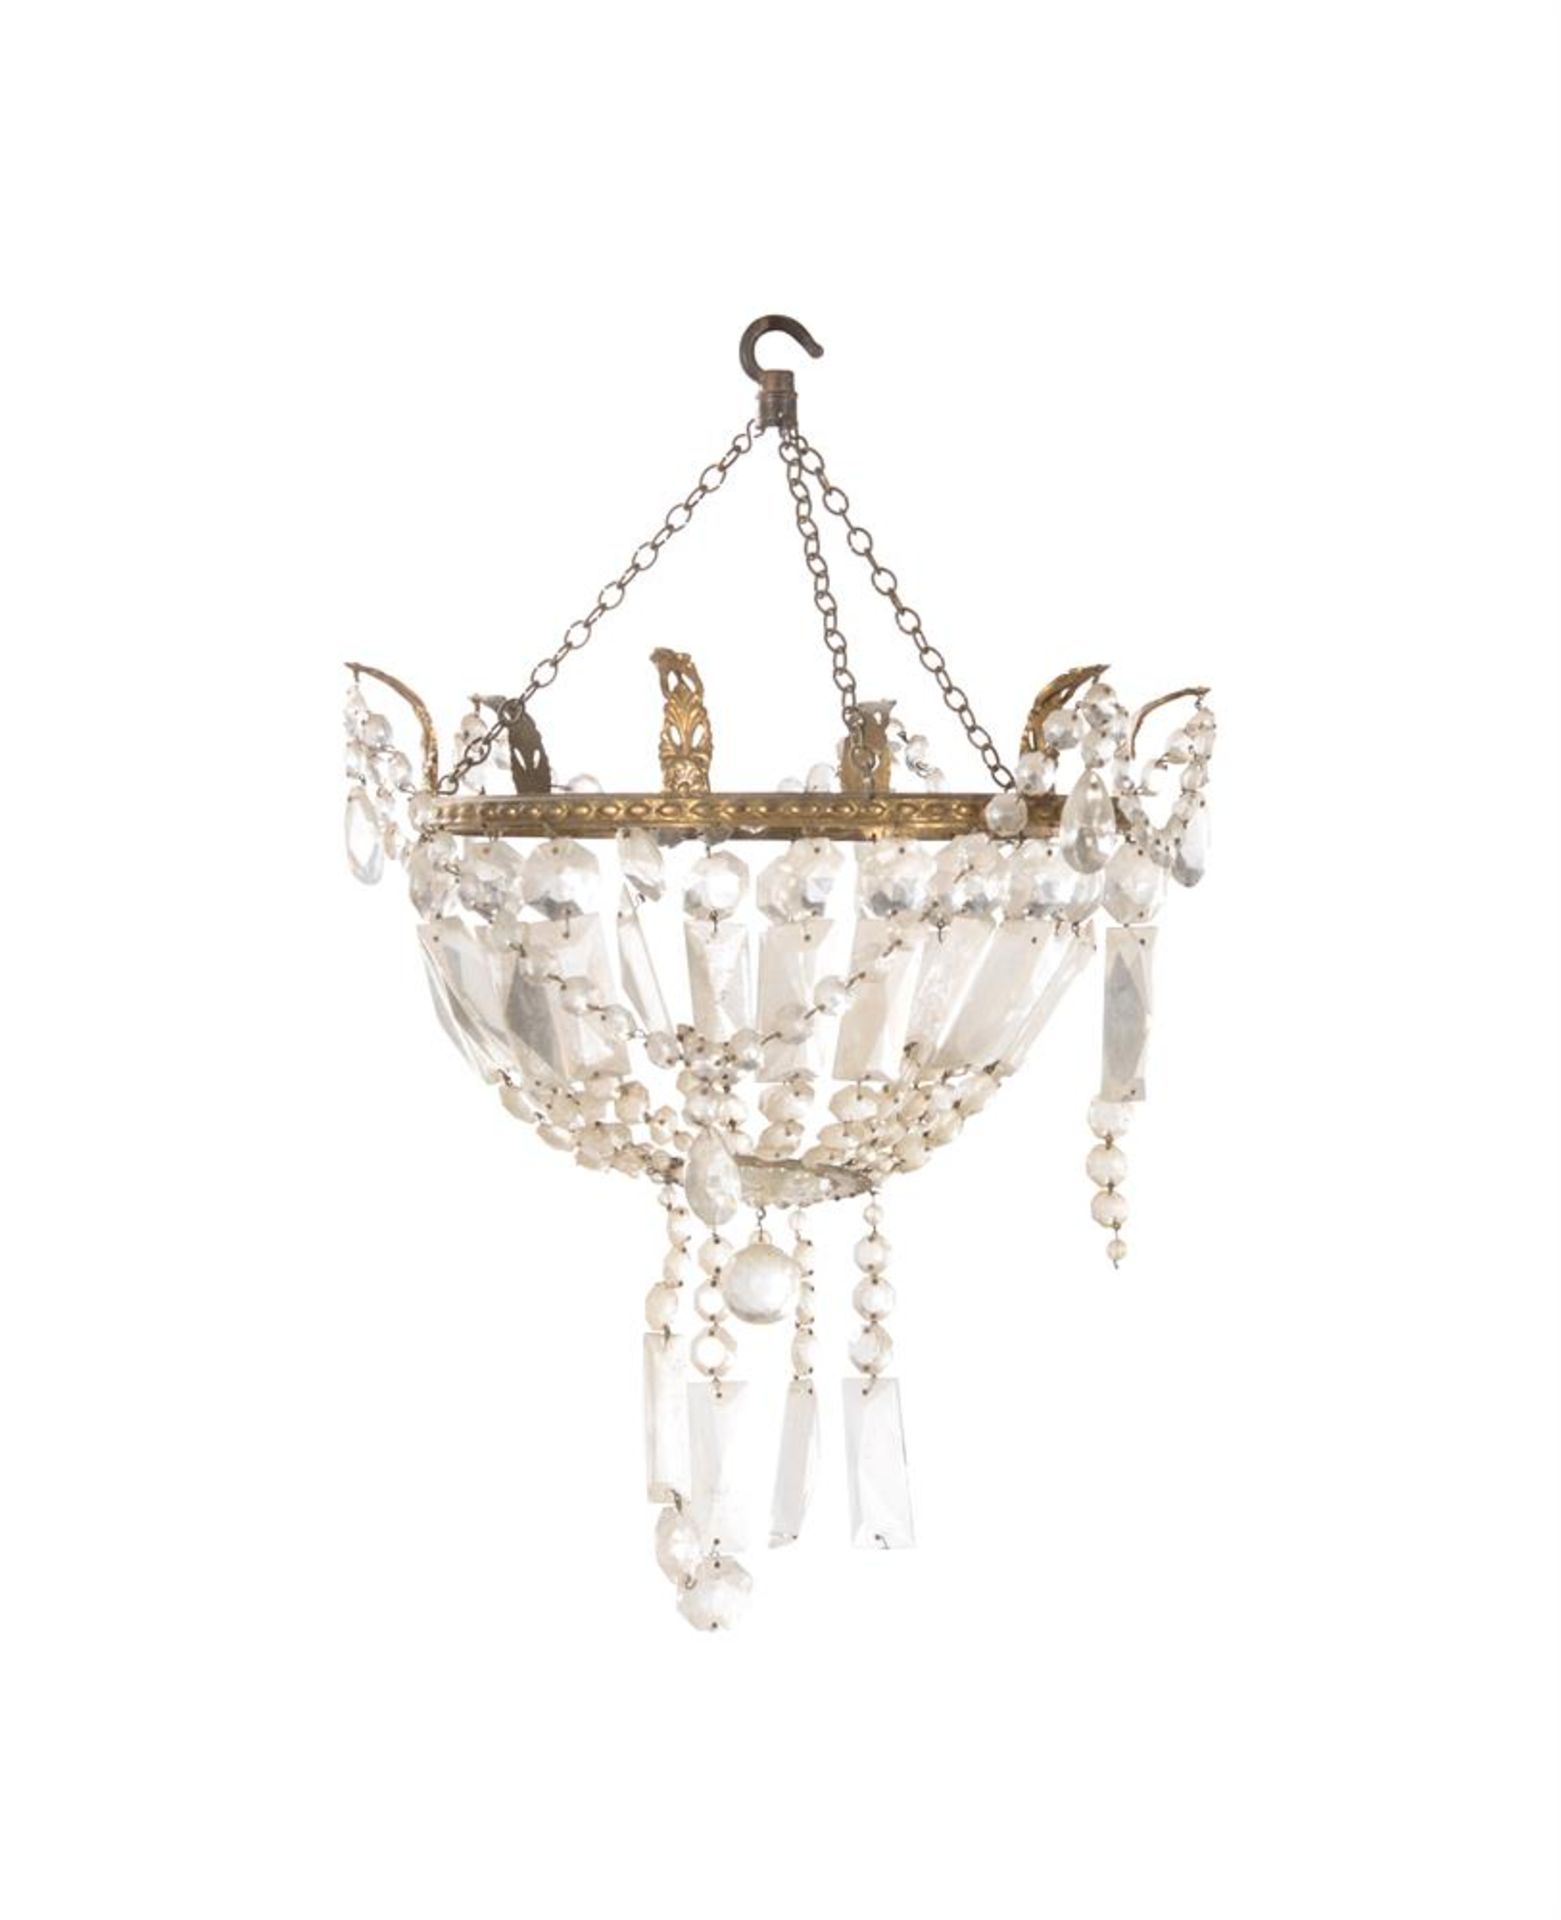 A GILT METAL AND FACETTED GLASS CHANDELIER - Image 2 of 2